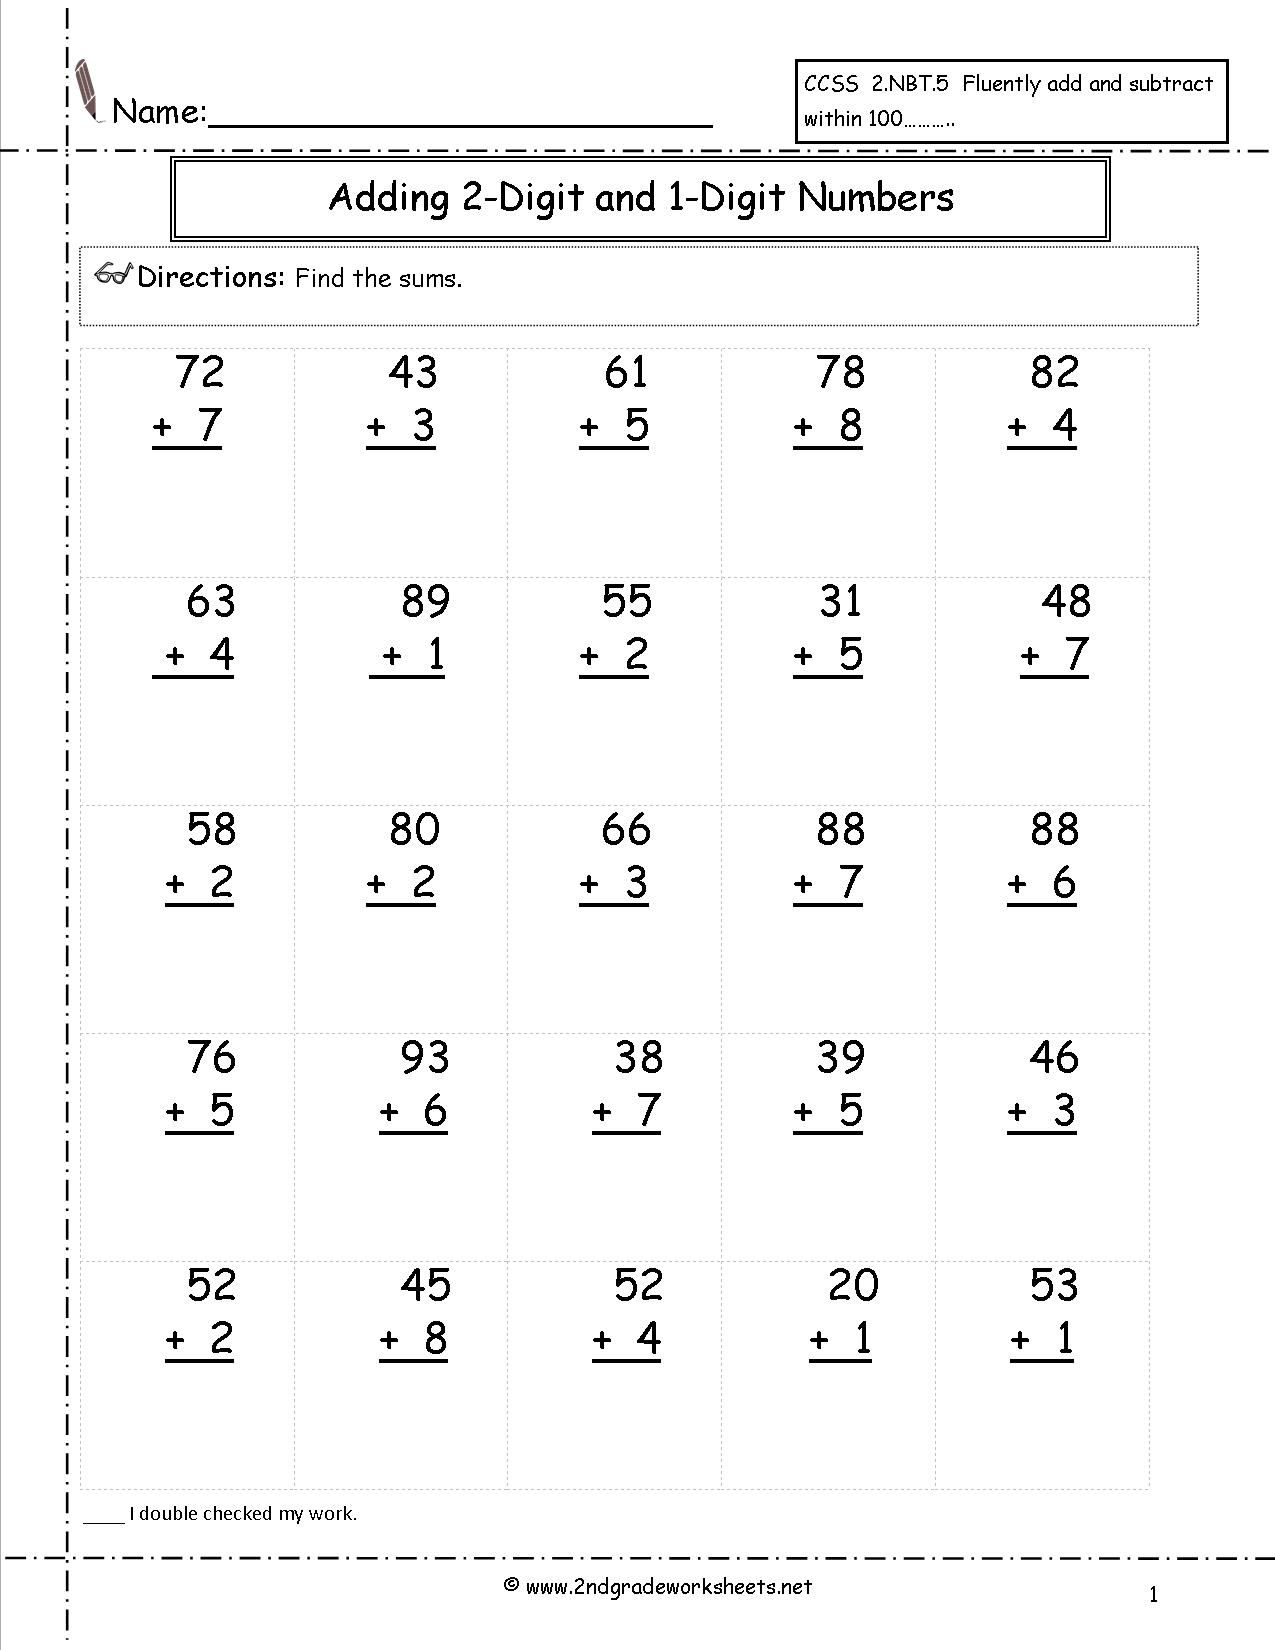 Adding Two Digit And One Digit Numbers | Satta | Addition Worksheets | Free Printable Two Digit Addition Worksheets